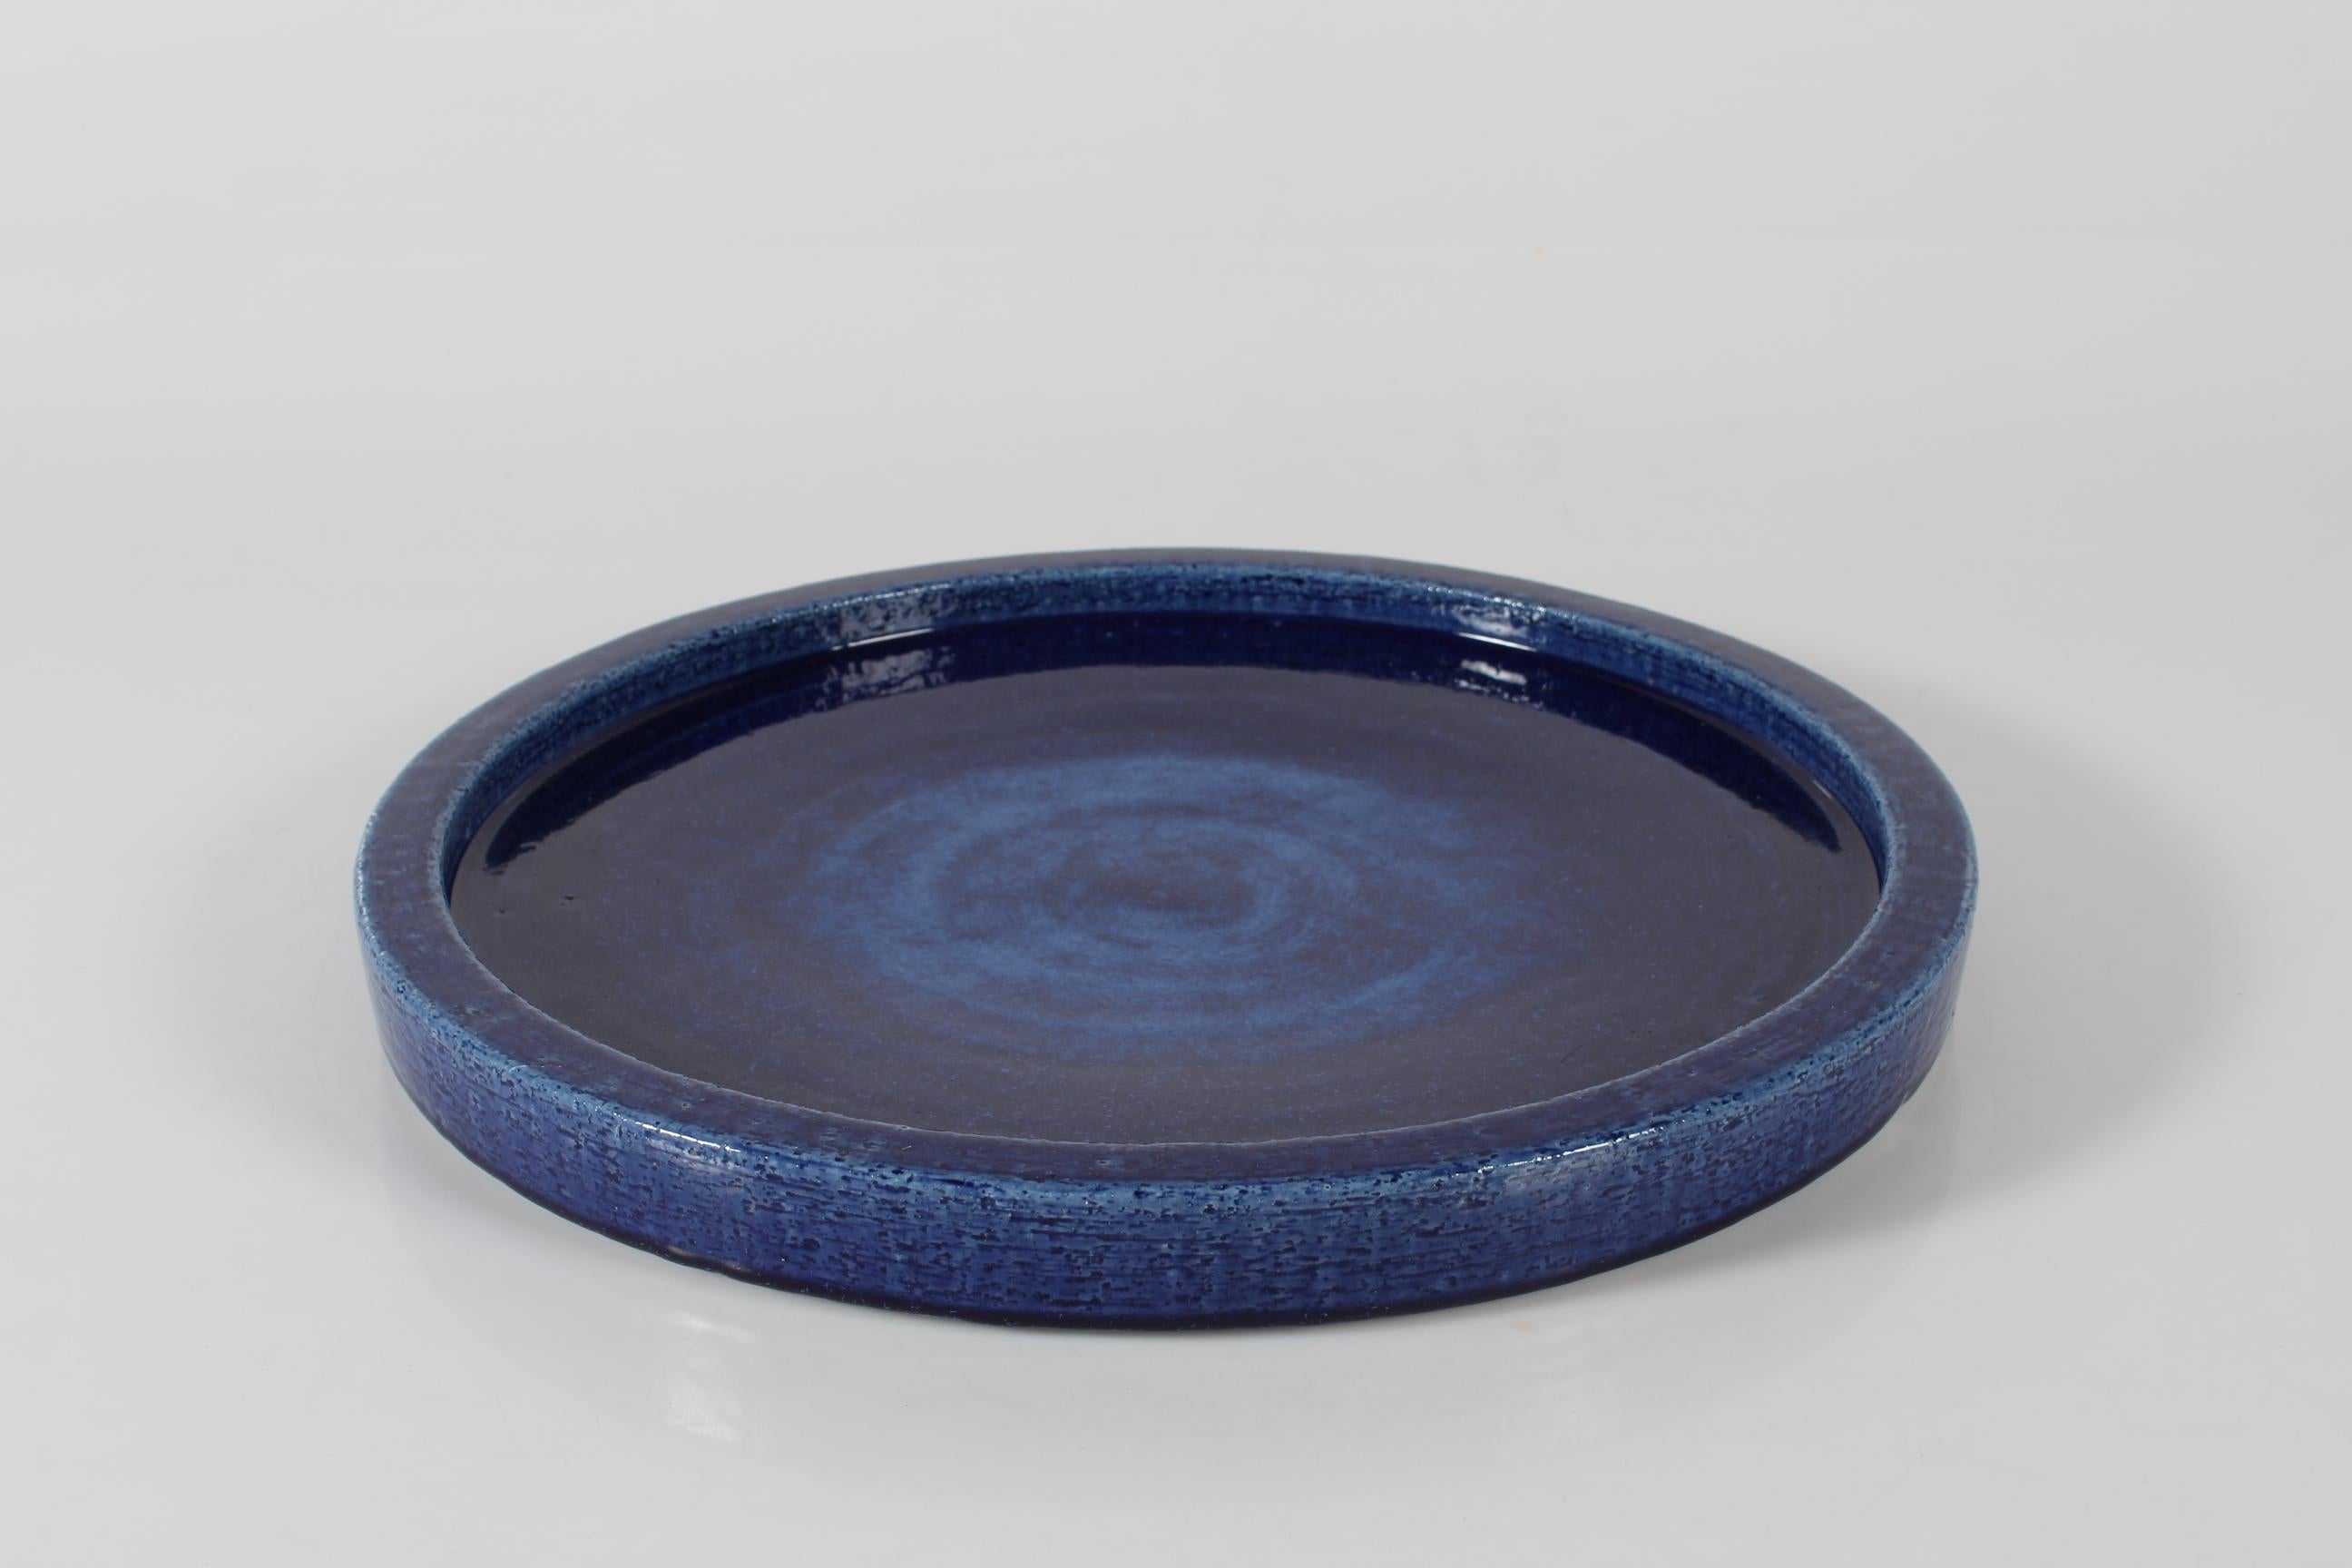 Rare collector´s item.
XXL size low rimmed stoneware dish by Annelise and Per Linnemann-Schmidt for Palshus in Denmark.
It's made of chamotte clay which gives a rough and vivid surface. 
Decorated with glossy glaze in deep blue color with a lighter